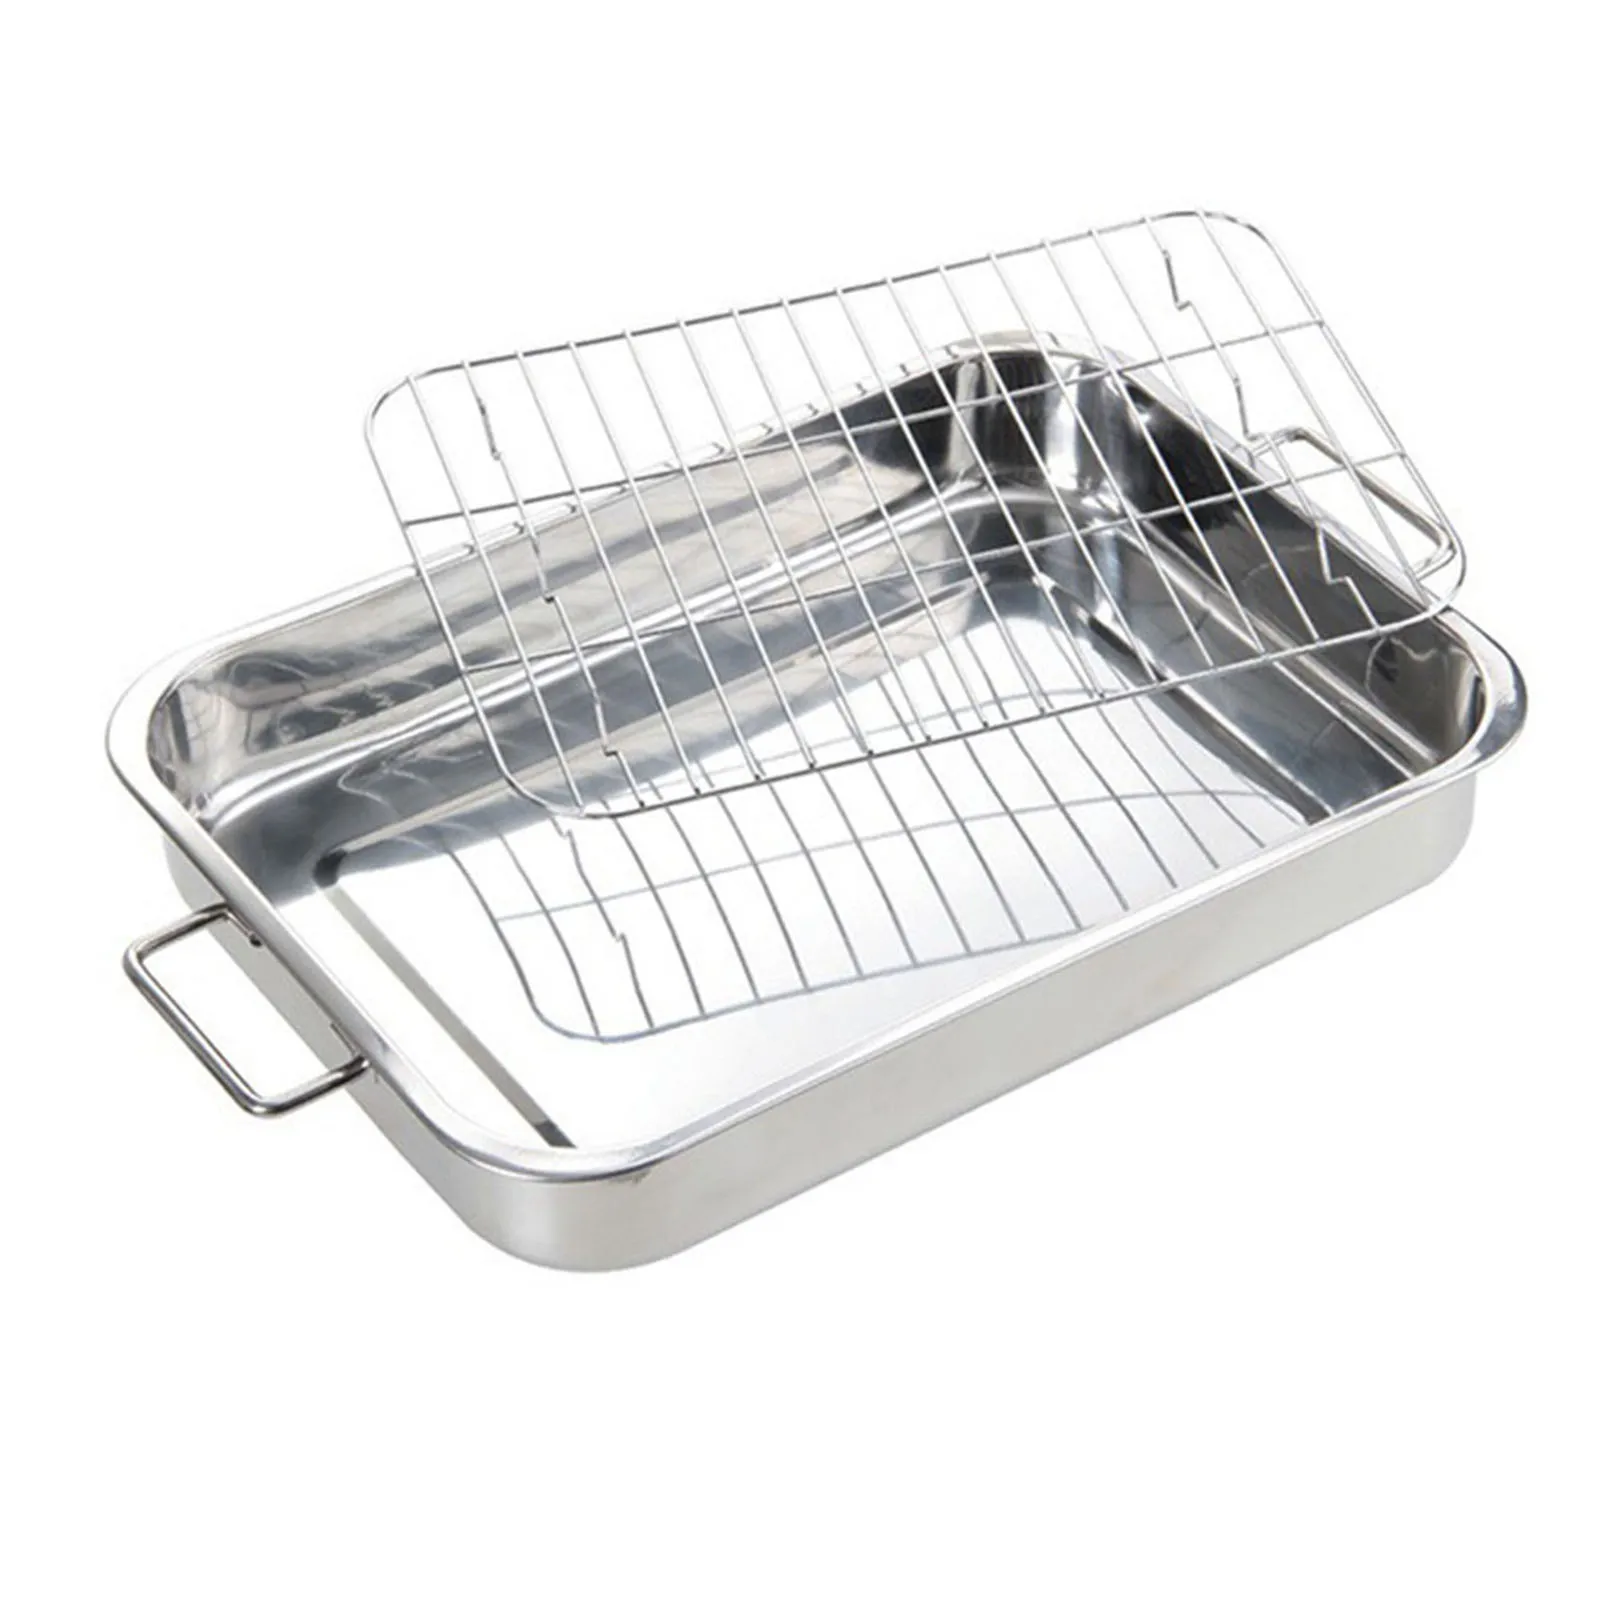 

Roast Dish Grill Deep Roasting Tray Oven Pan Grill Rack Baking Roaster For Kitchen Roast Chicken Meat Tools Stainless Steel